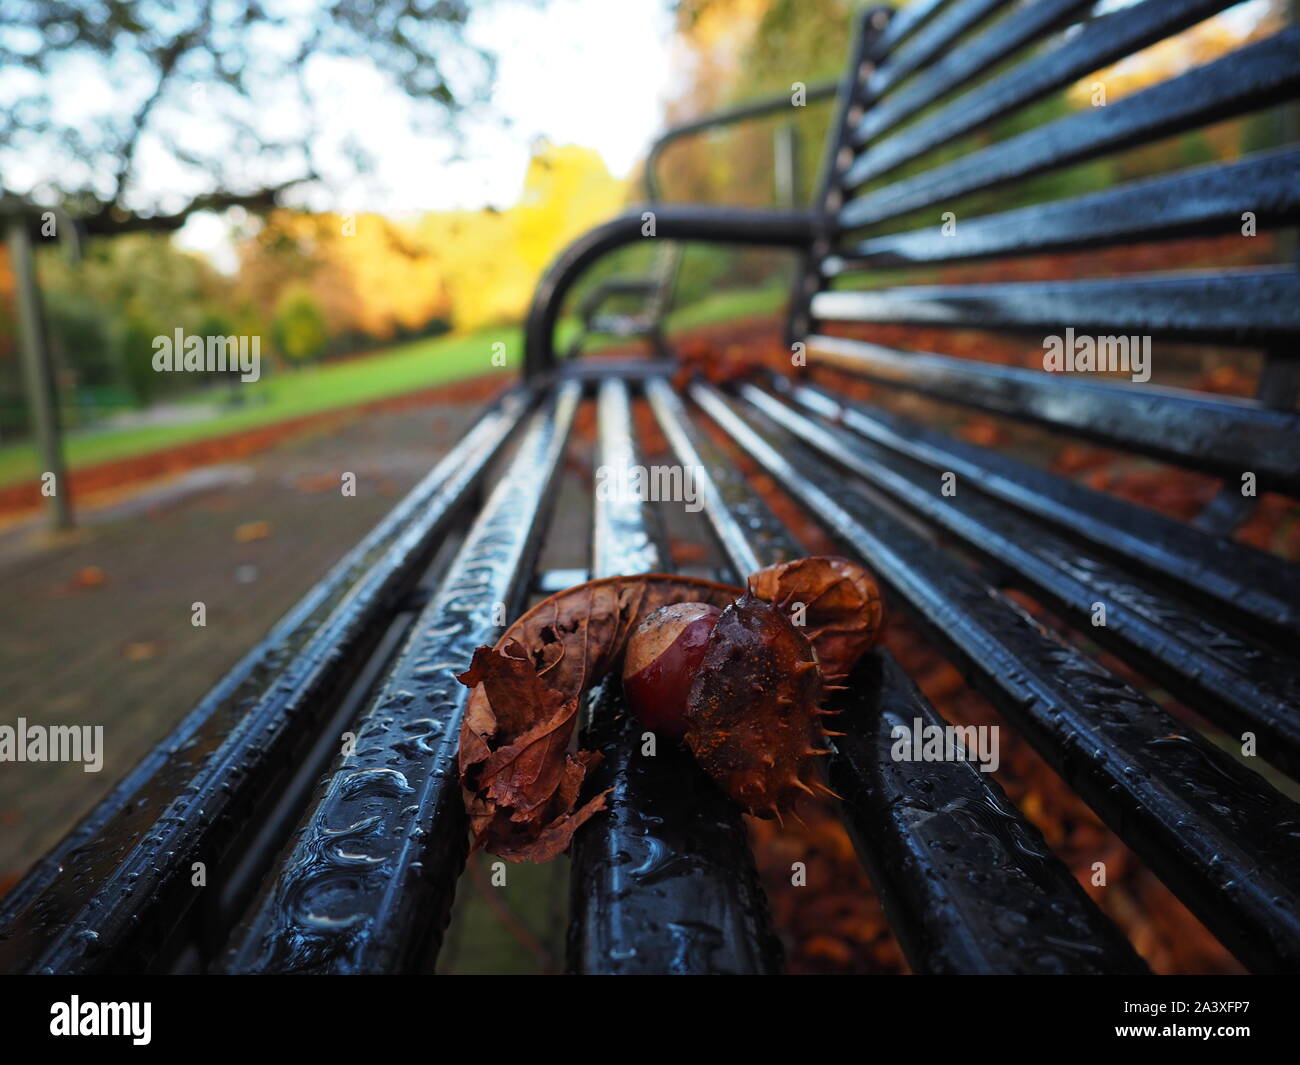 Conkers on a bench in the park Stock Photo